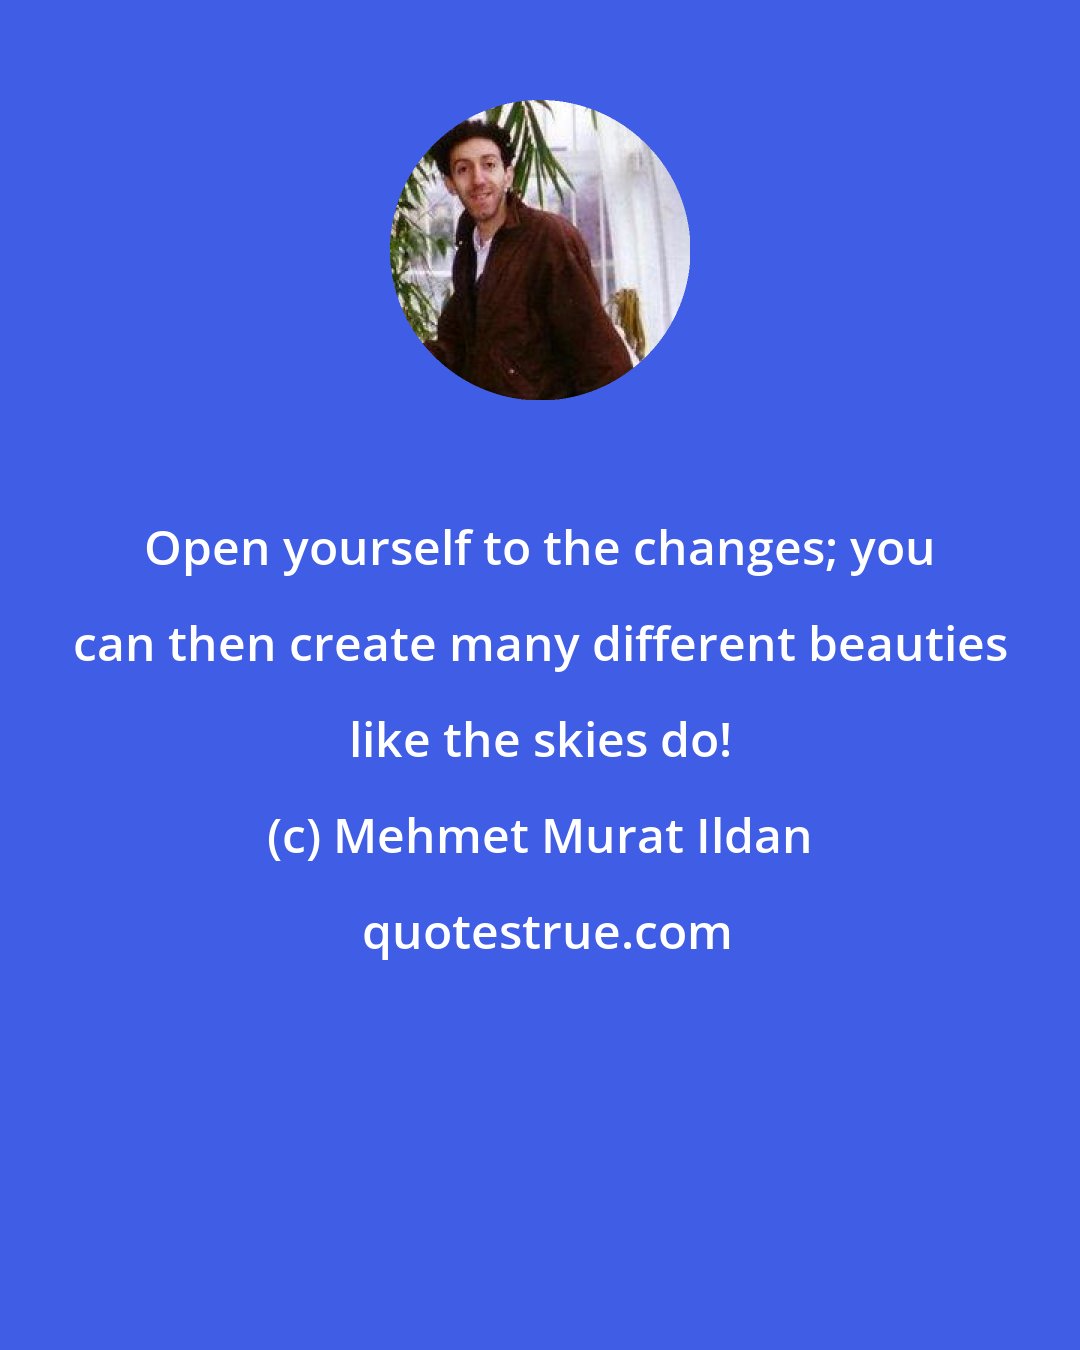 Mehmet Murat Ildan: Open yourself to the changes; you can then create many different beauties like the skies do!